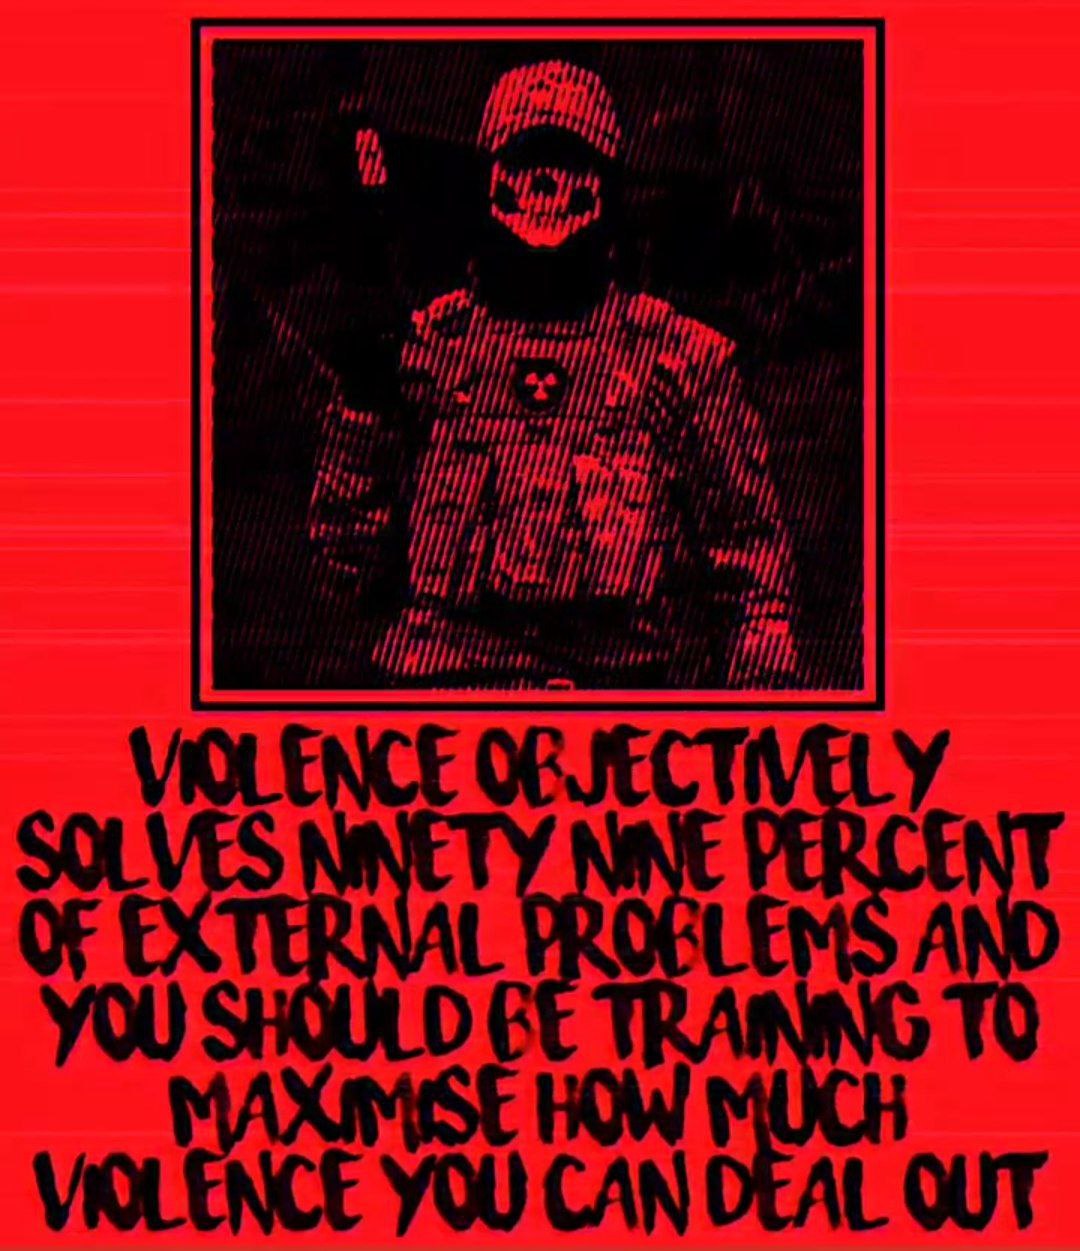 (Poster / Right Wing Extremism) Accelerationists Share Stochastic Poster Promoting that 'Violence Solves 99% of External Problems' - 28 May 2023